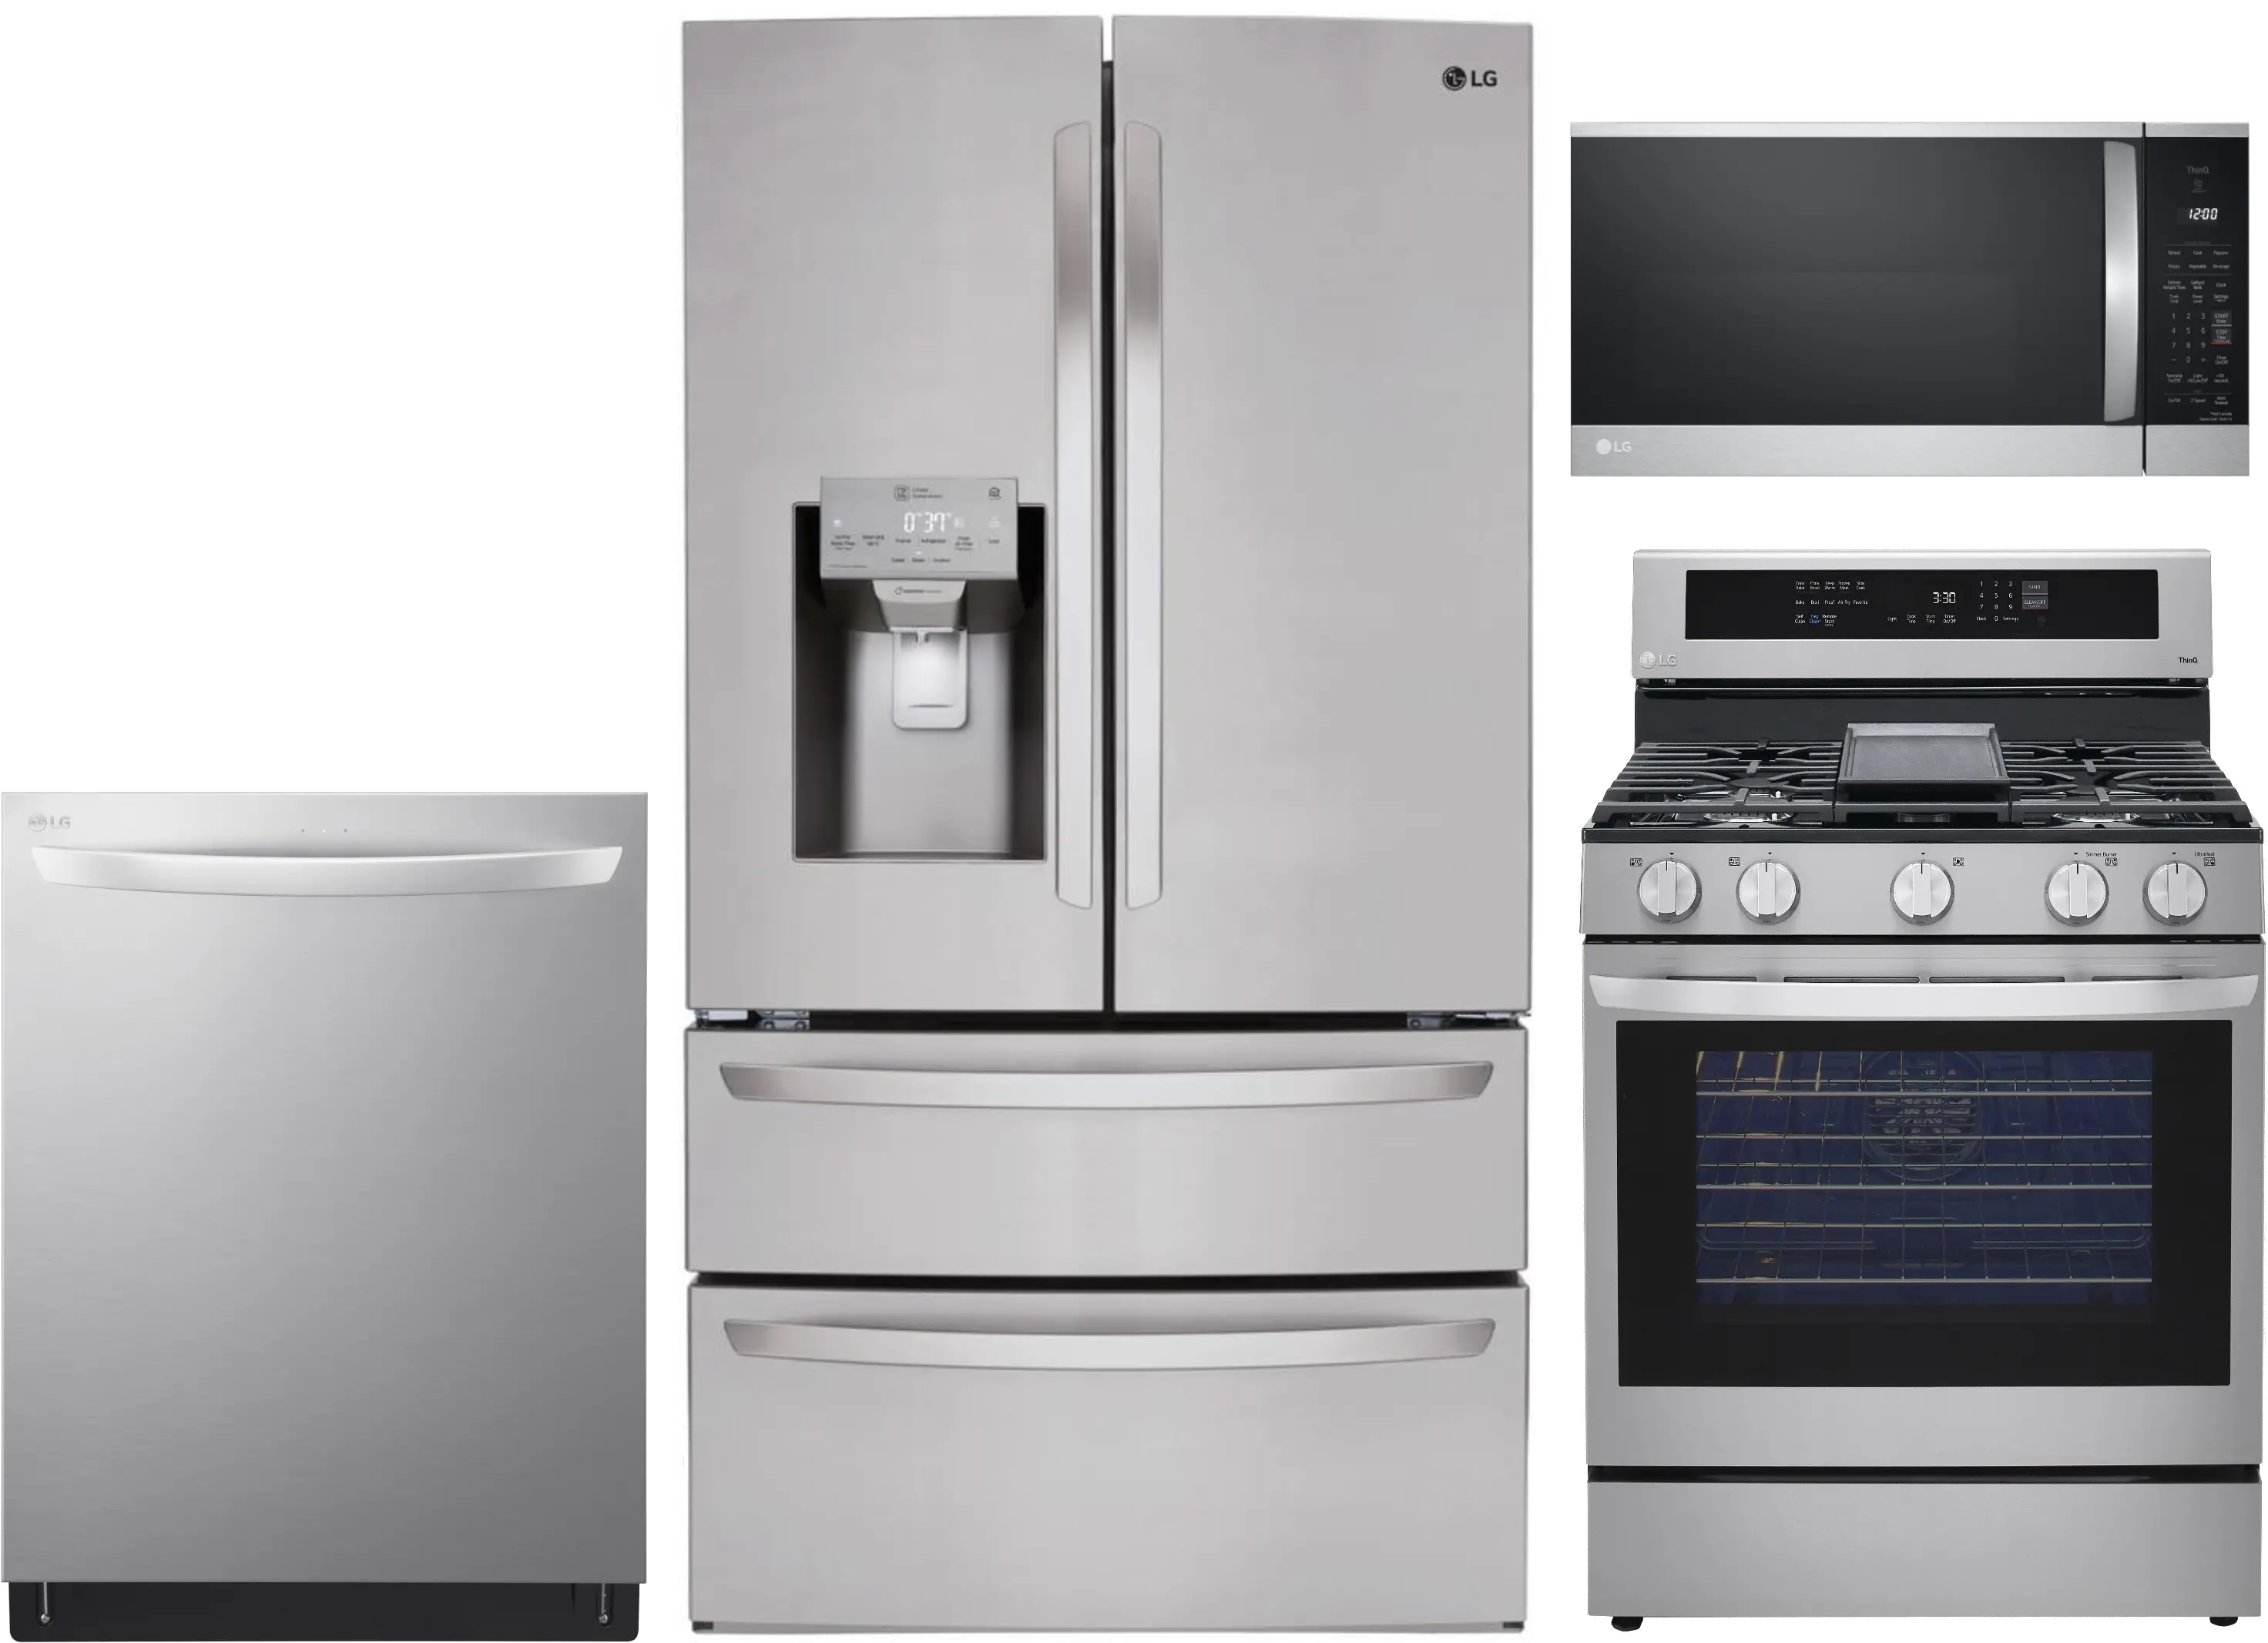 https://static.rcwilley.com/products/113379714/LG-4-Piece-Gas-Appliance-Package---Stainless-Steel-rcwilley-image1.webp